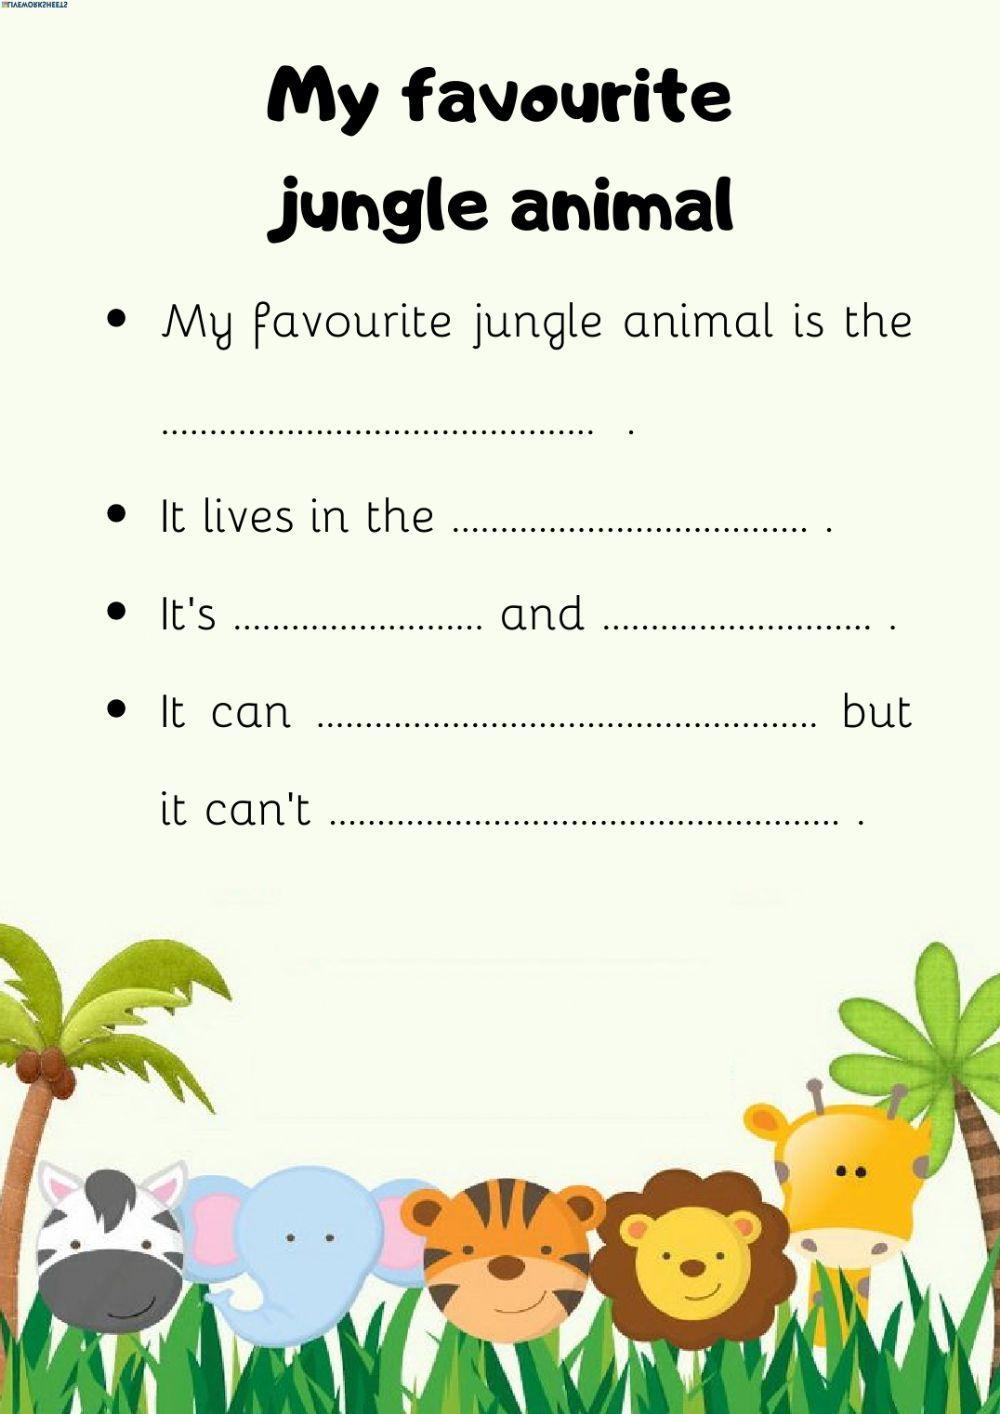 What's your favourite animal?